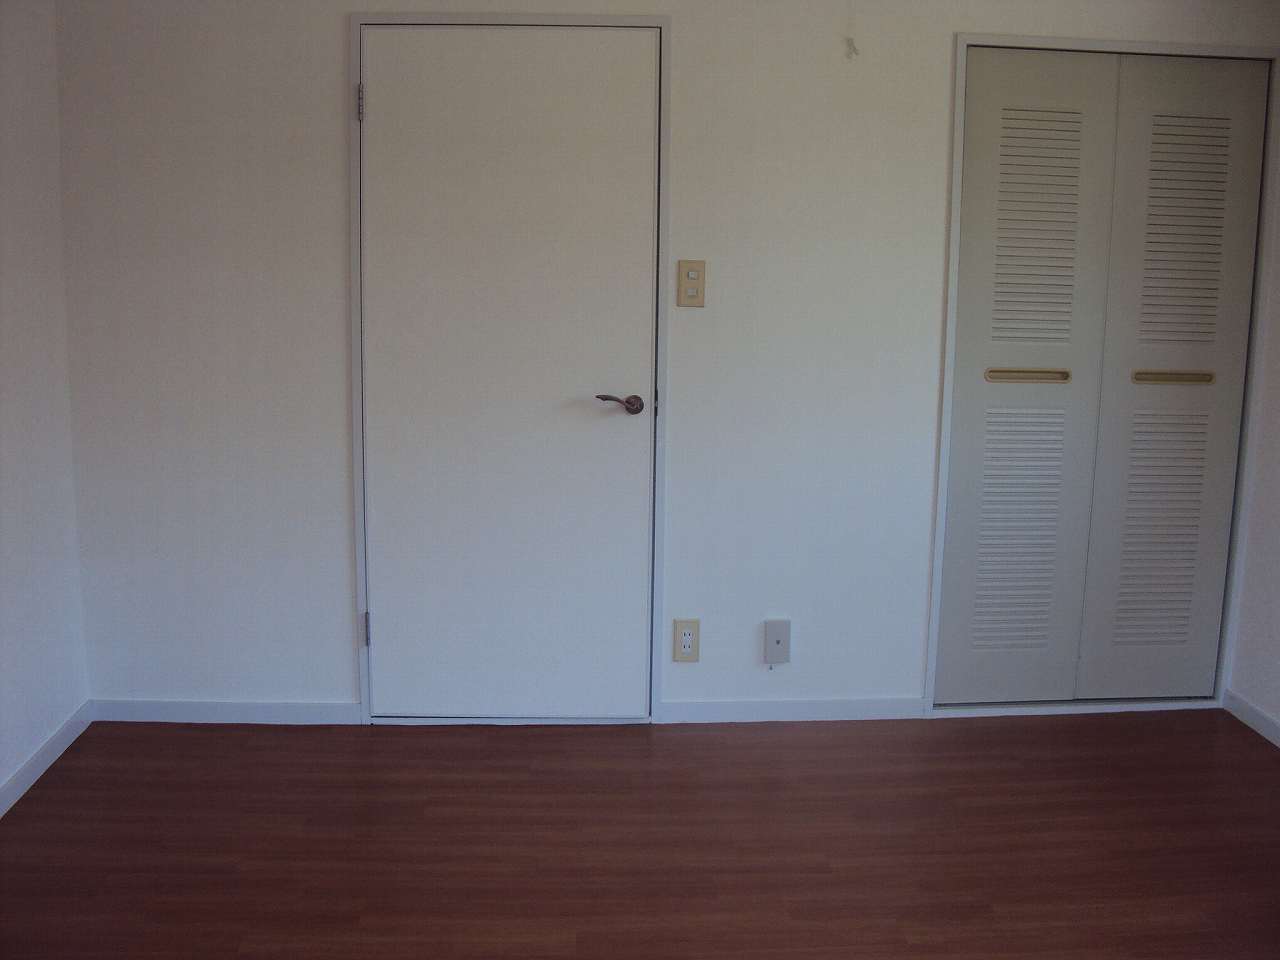 Other room space. There is a door between the kitchen and the room